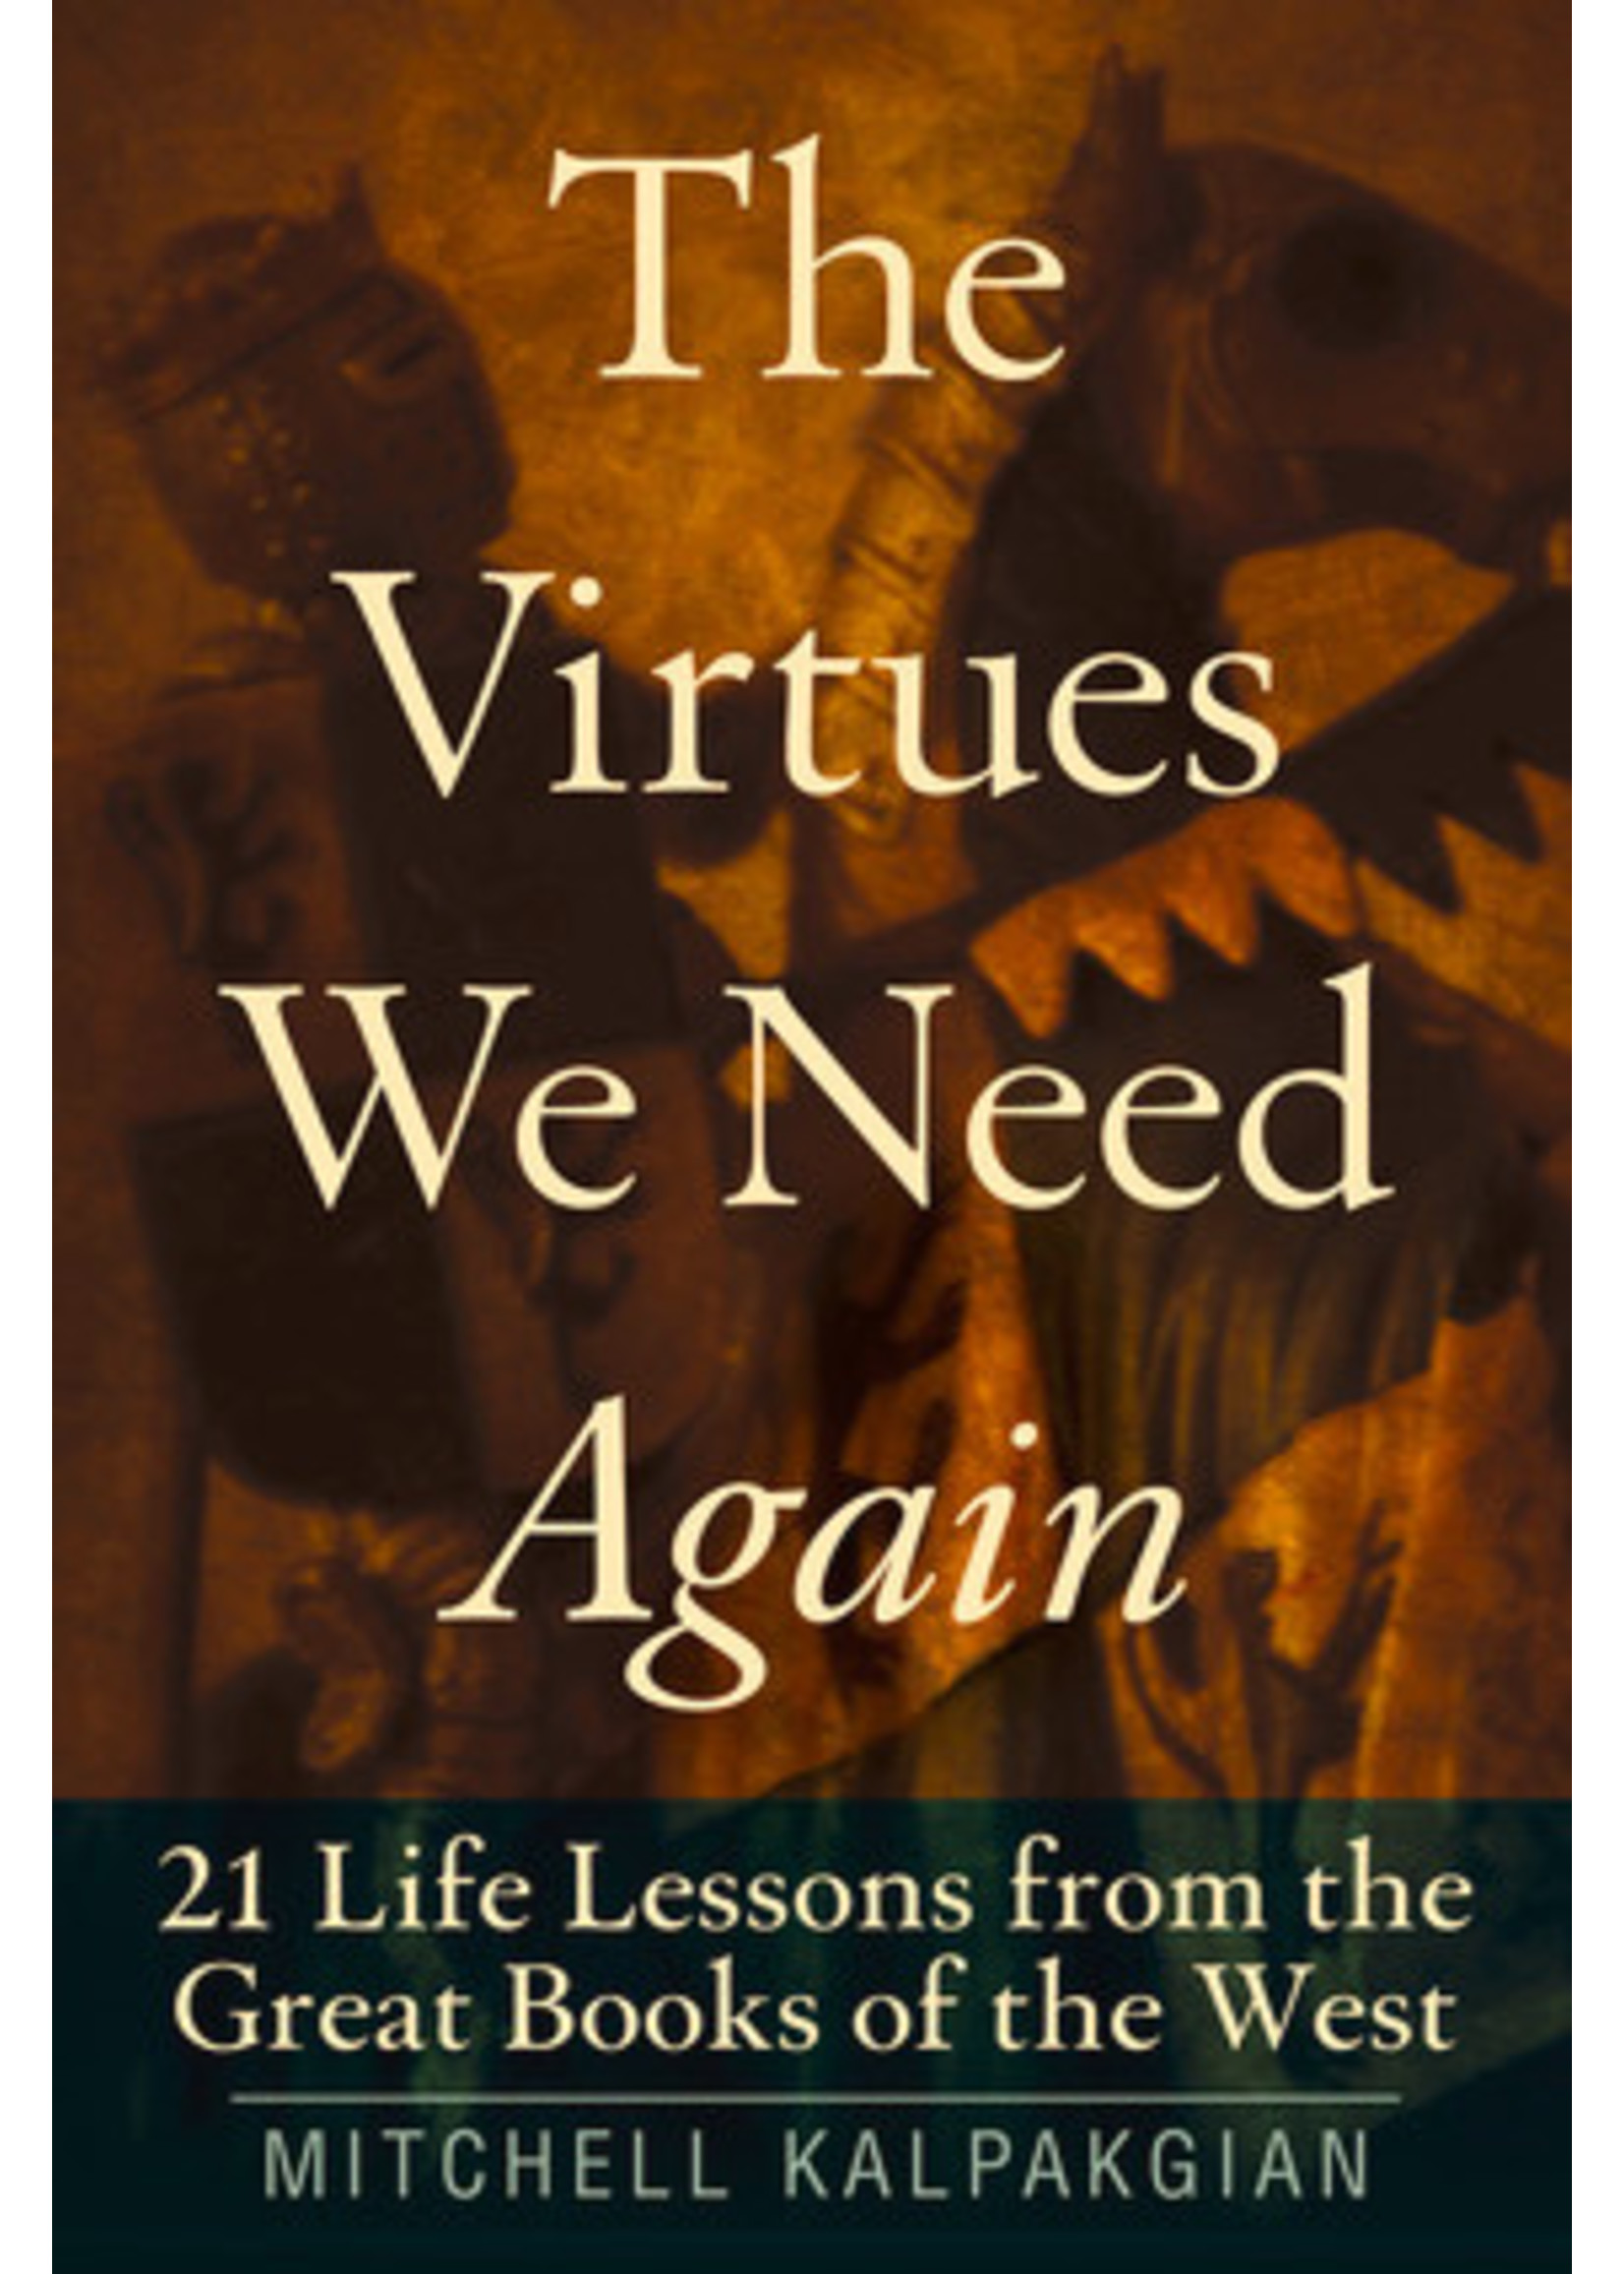 The Virtues We Need Again: 21 Life Lessons from the Great Books of the West